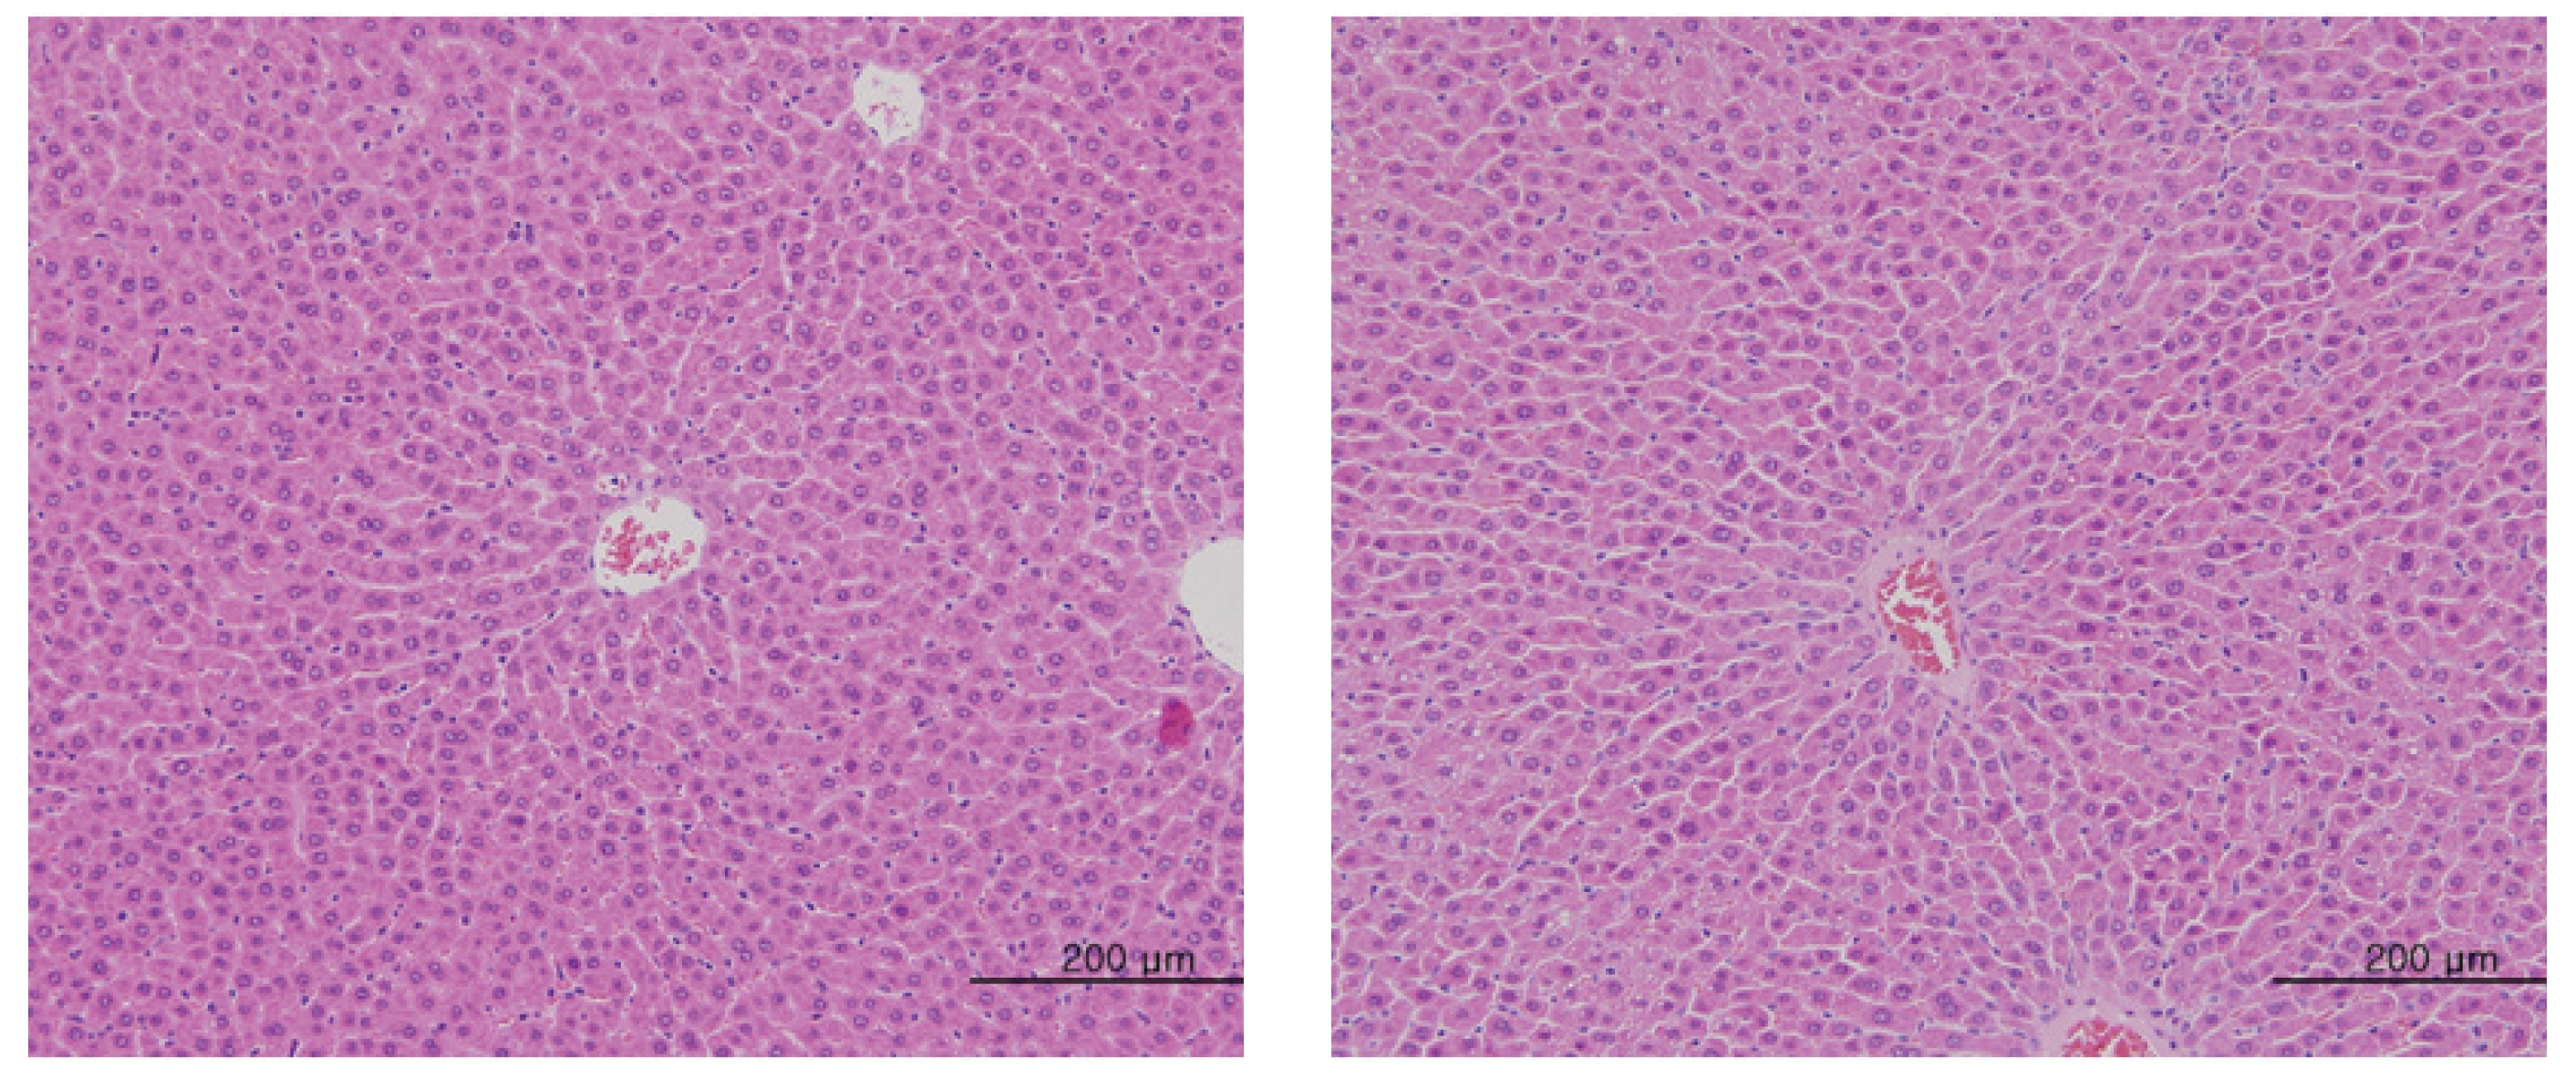 Liver tissue from an intravenous single-dose toxicity study of Mountain ginseng pharmacopuncturein Sprague-Dawley rats.
The high-dose group (20 mg/kg) and the control group show minimal changes of focal perivascular cell infiltration, extramedullary hematopoisis
and microgranuloma. Pathological change was detected by H&E staining. Lt, Control; Rt, Experimental group. × 200.